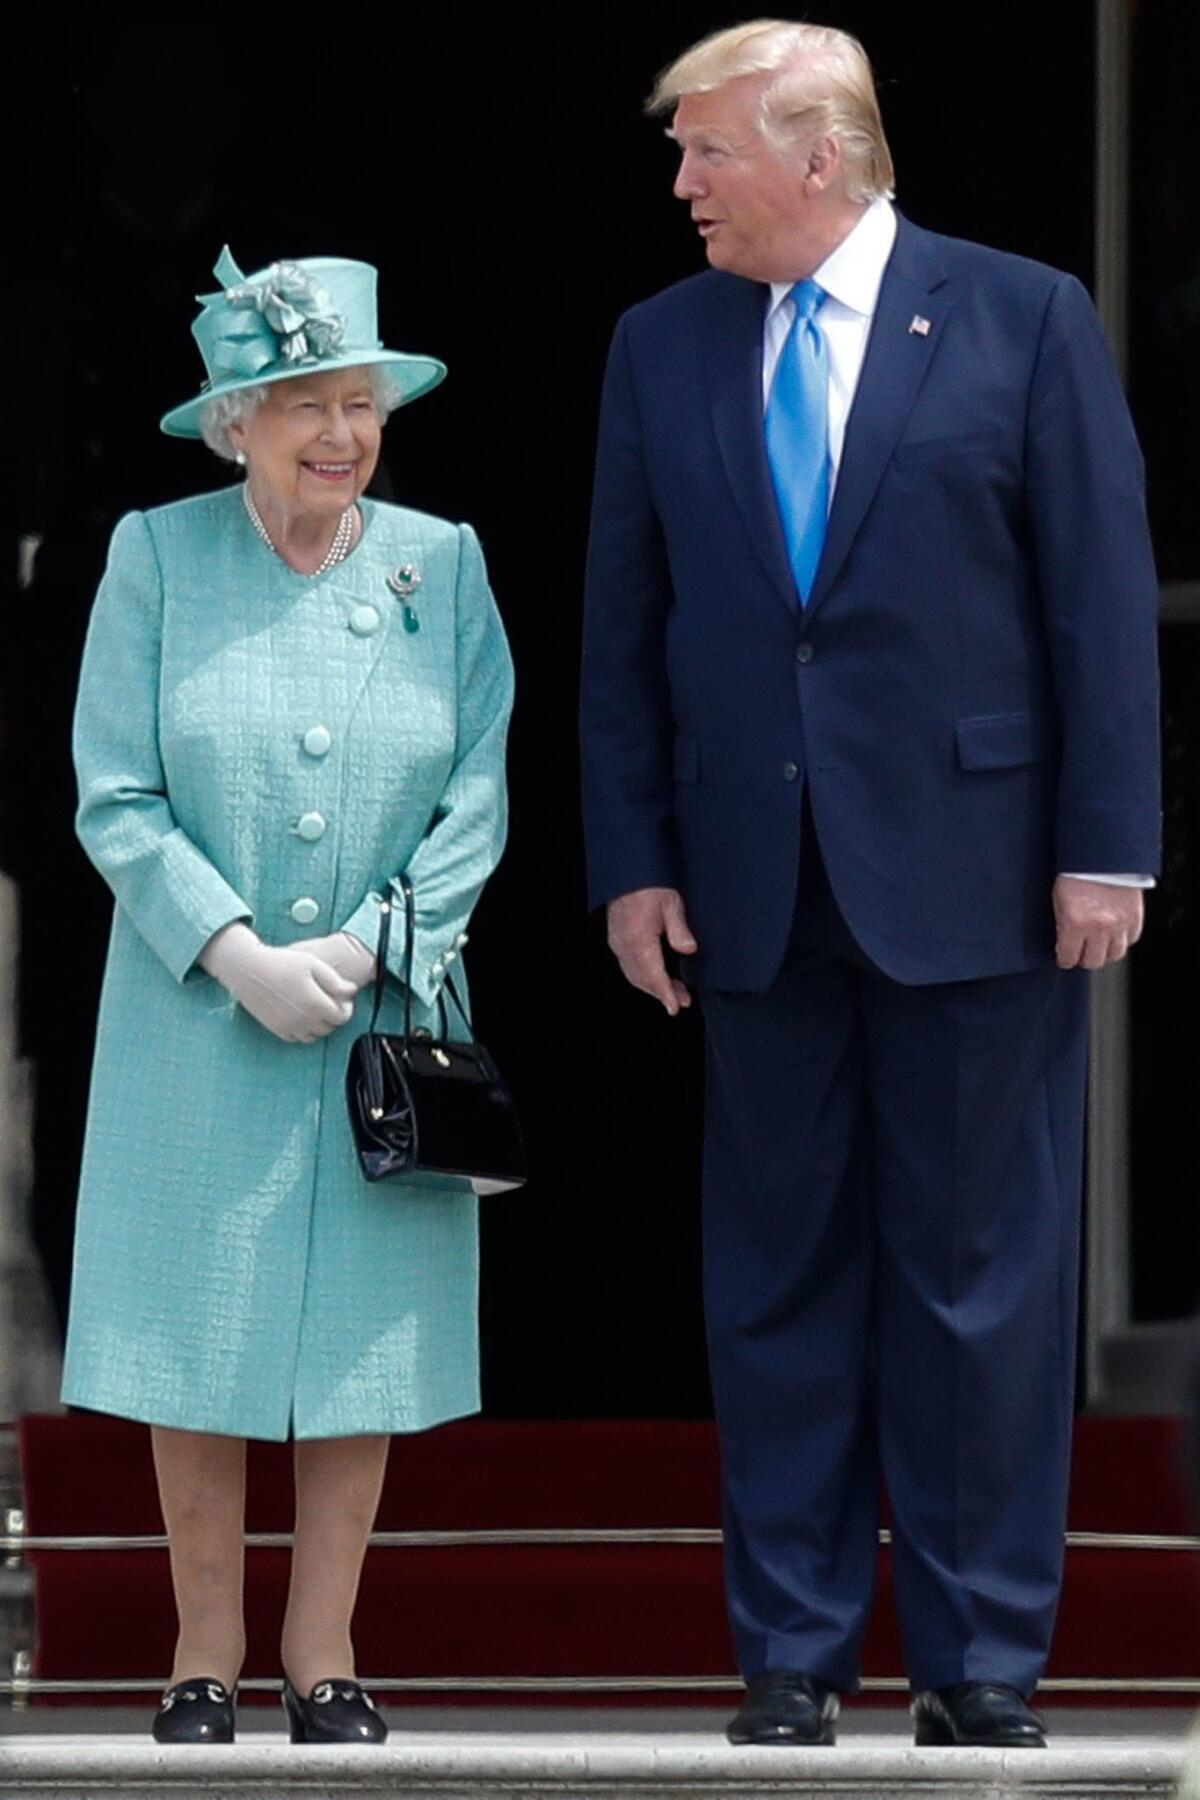 Queen Elizabeth II smiles as she speaks with President Trump during a welcome ceremony at Buckingham Palace on June 3, 2019.